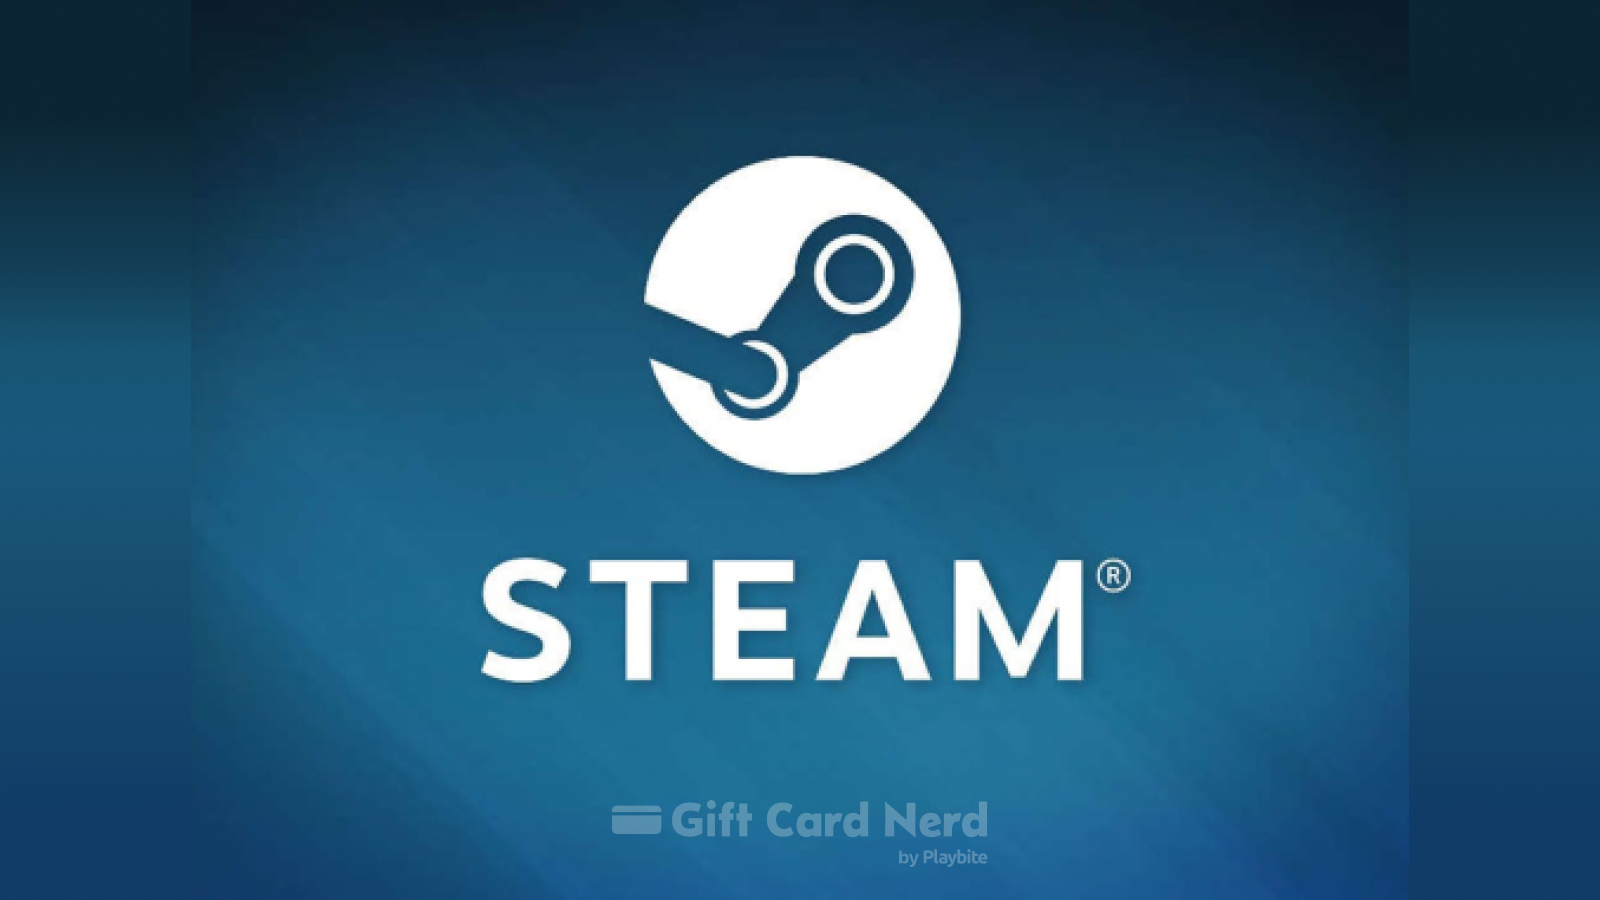 Can I Use a Steam Gift Card on Cash App?